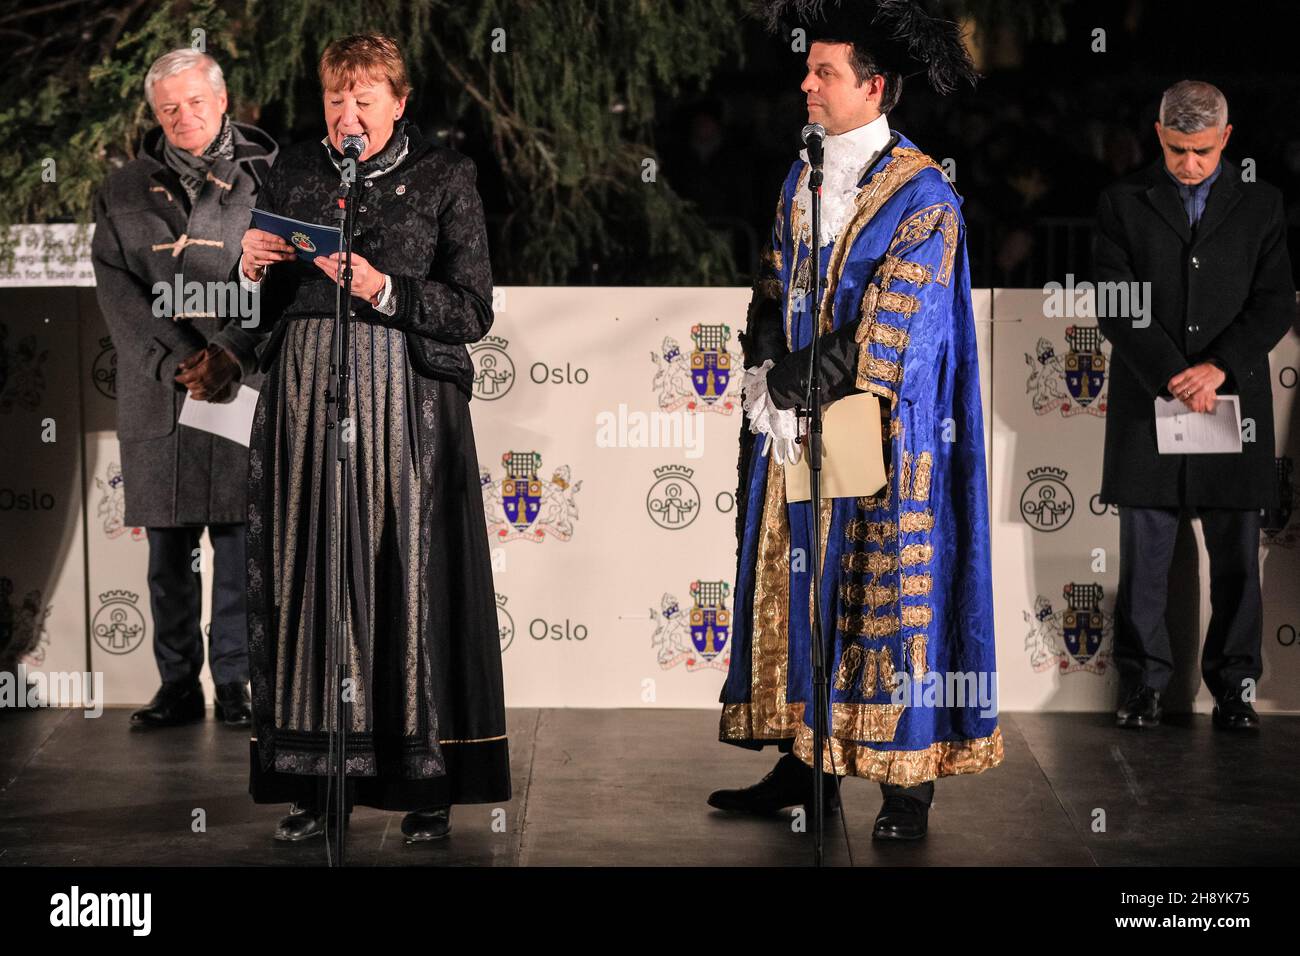 Westminster, London, 02nd Dec 2021. Mayor of Oslo, Marianne Borgen, speaks, with the Lord Mayor of Westminster, Andrew Smith, and Mayor of London, Sadiq Khan, also attending, as well as others. The Trafalgar Square Christmas Tree lights are switched on in a traditional ceremony this evening. The 25-metre high tree, usually a Norwegian spruce, is a gift from the people of Norway to London, in thanks for Britain's support in World War II. This historic tradition has happened every year since 1947. Credit: Imageplotter/Alamy Live News Stock Photo